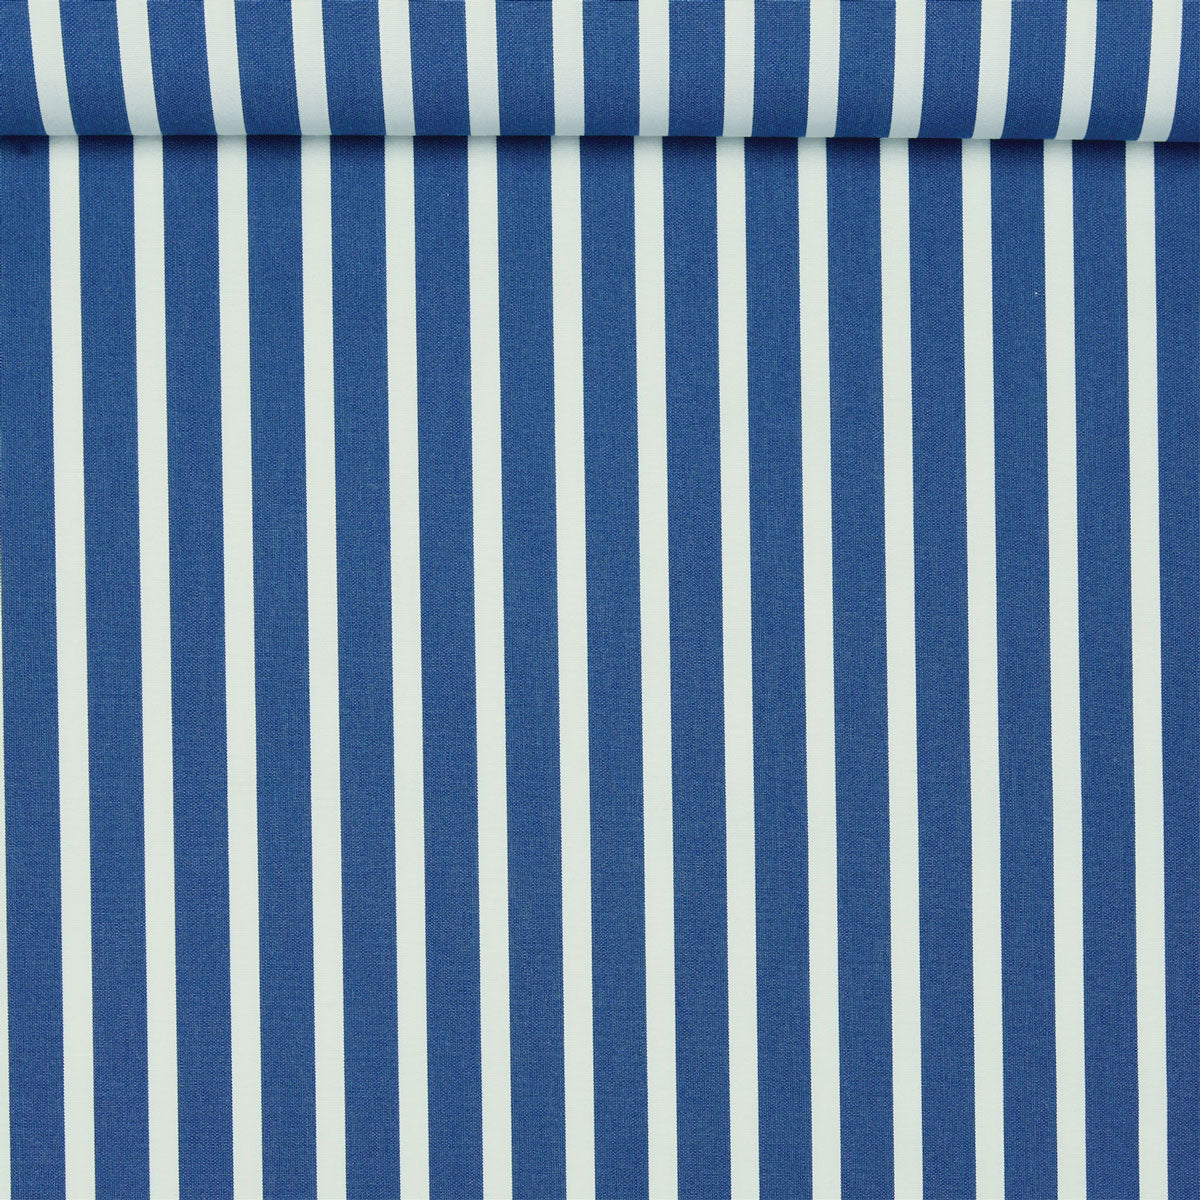 A birds eye view of a blue and white striped performance fabric for a beach float for adults.